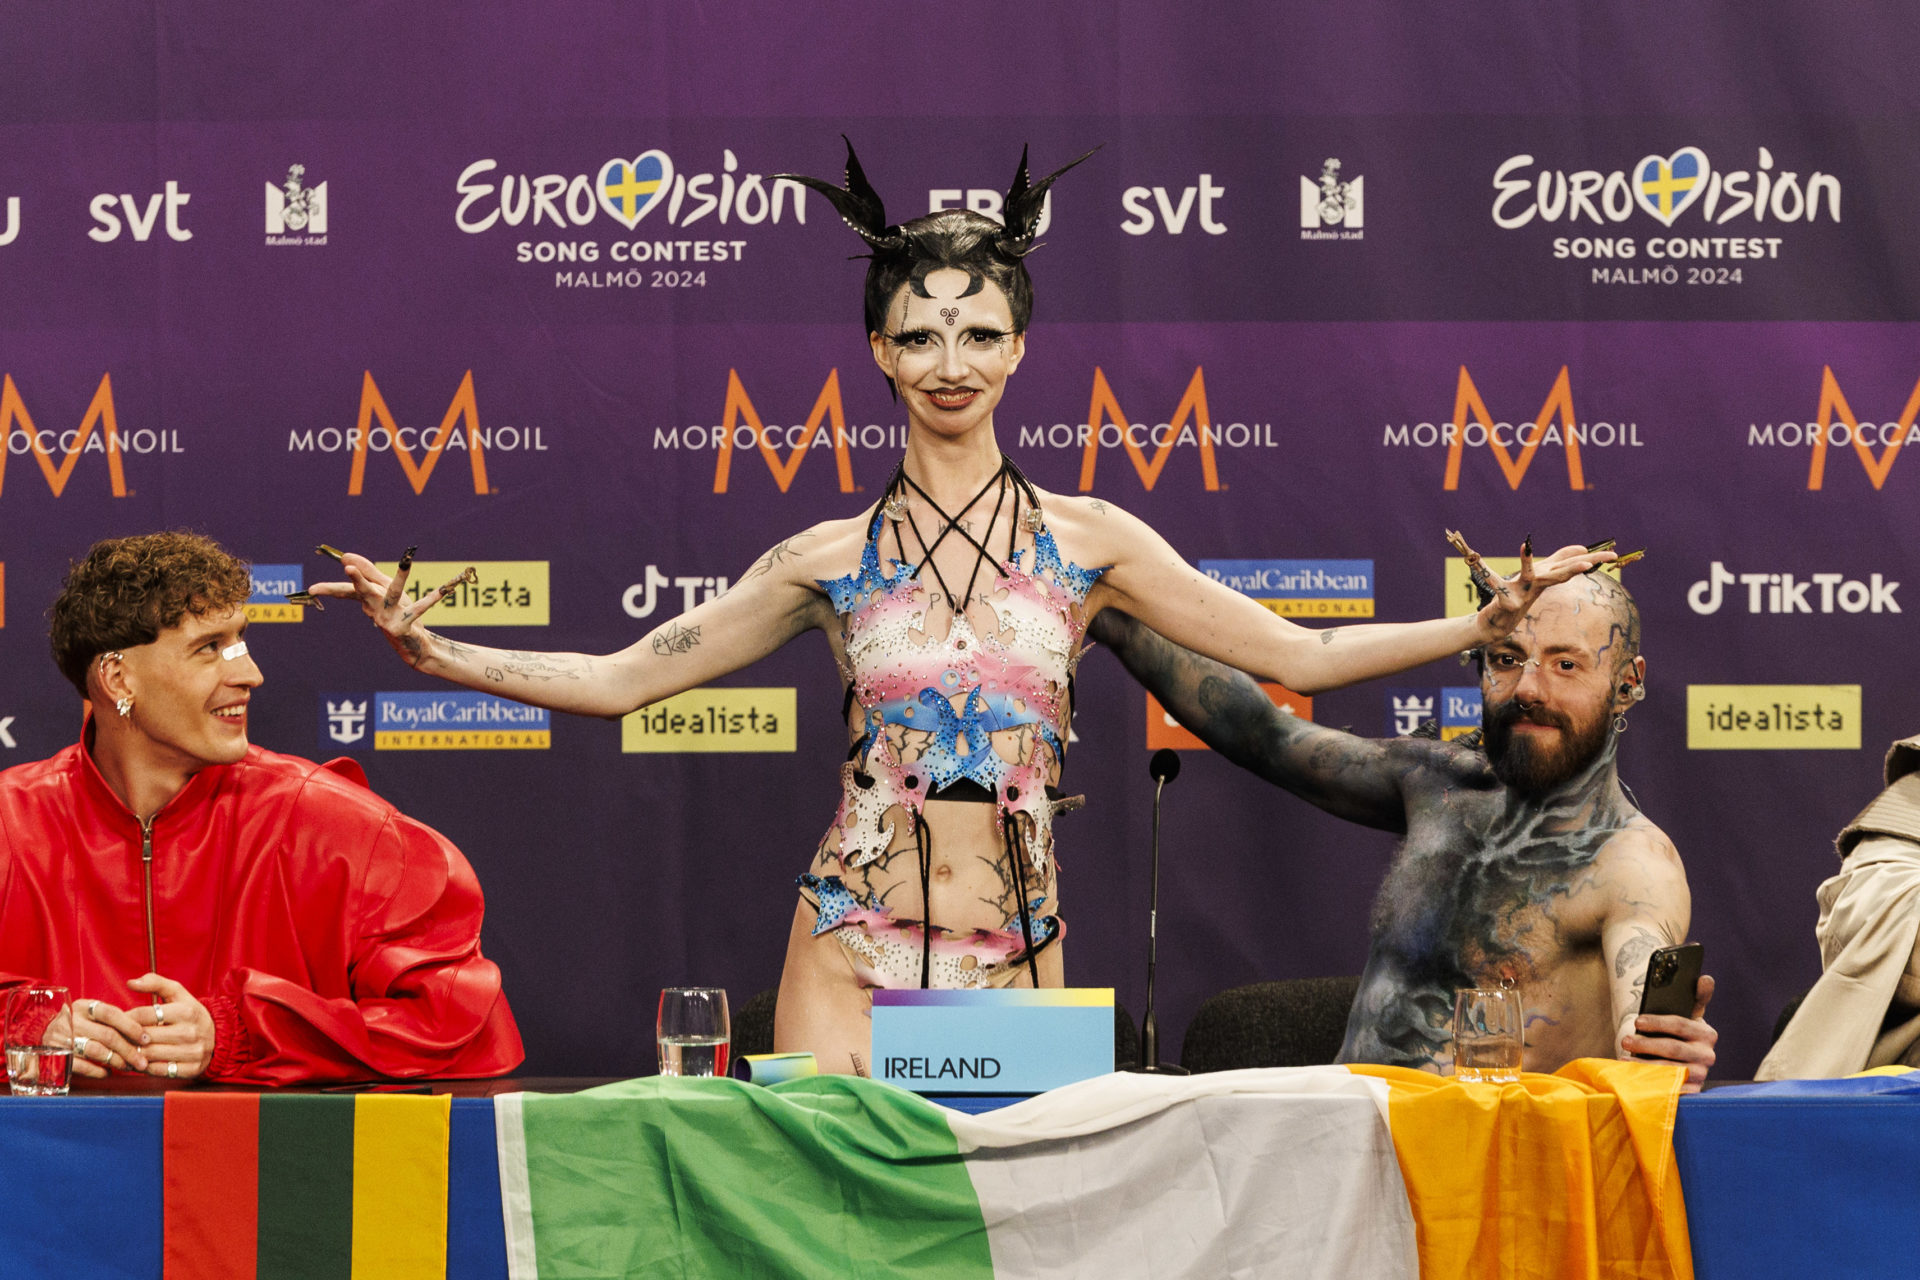 Ireland's Bambie Thug during a post-show press conference after they qualified for the Eurovision Song Contest Grand Final, 8-5-24